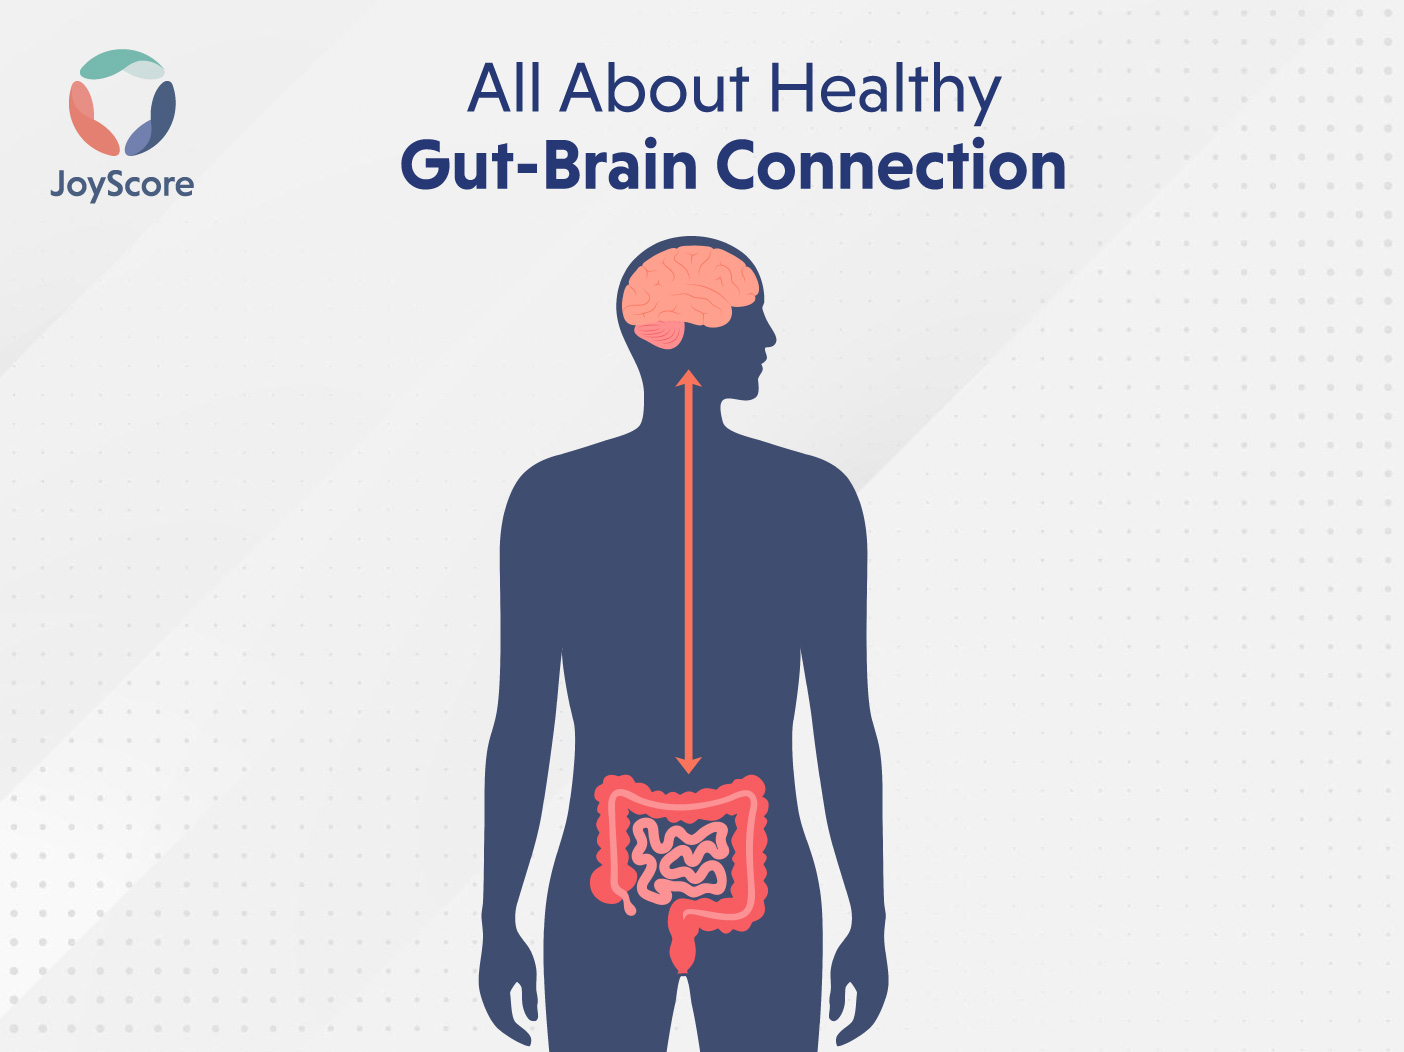 All About Healthy Gut-Brain Connection